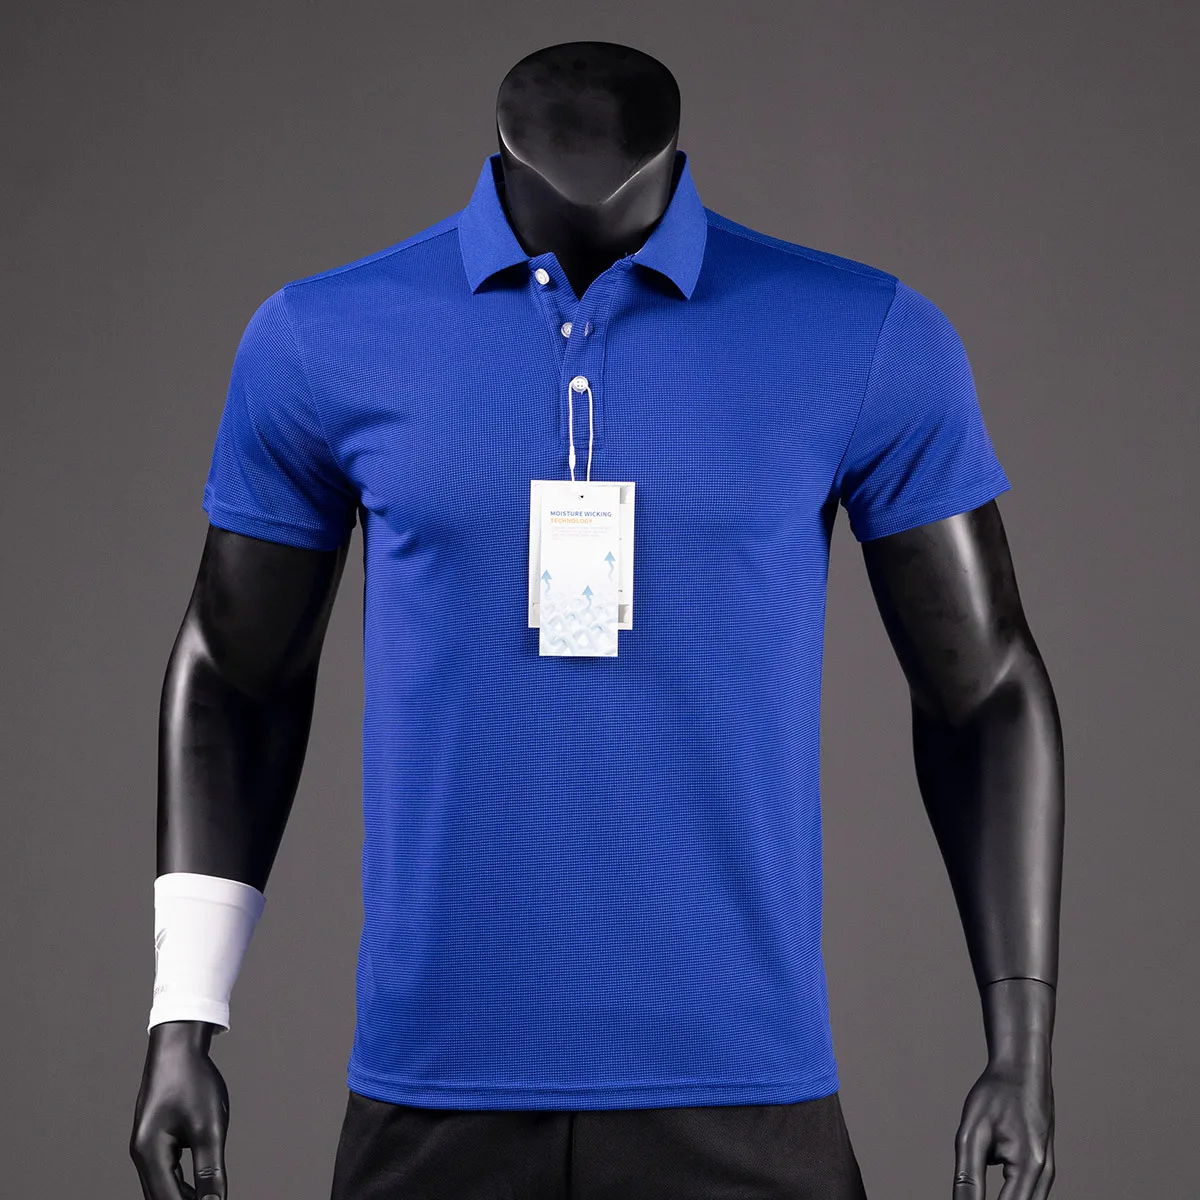 Men's Golf Shirt Luxury Functional Polo Shirt Quick-drying Perspiration Breathable Lapel Short-sleeved T-shirt for Man Summer 14